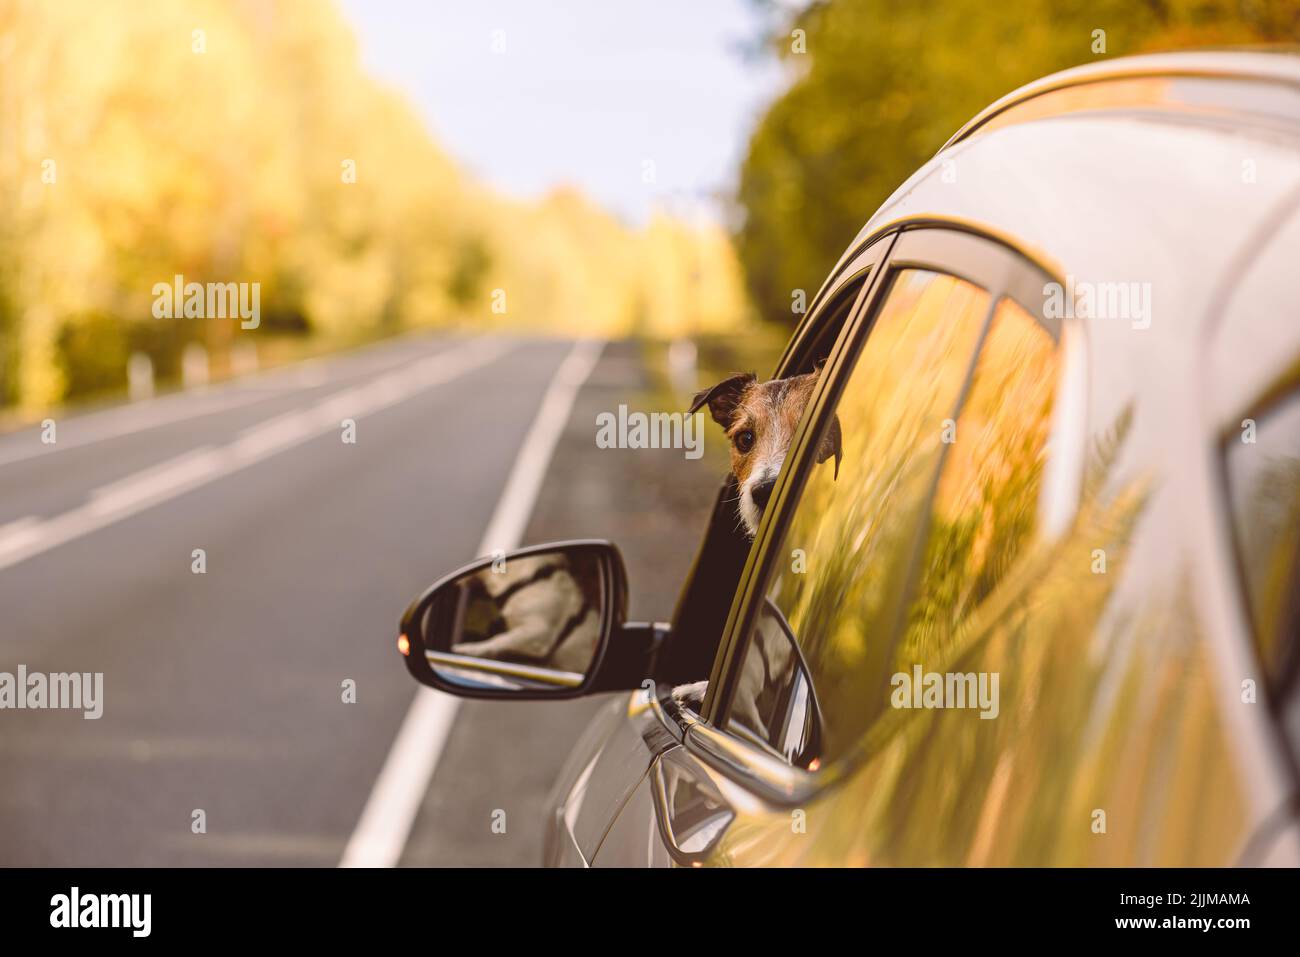 Family pet dog waiting in car parked on road on beautiful fall day Stock Photo